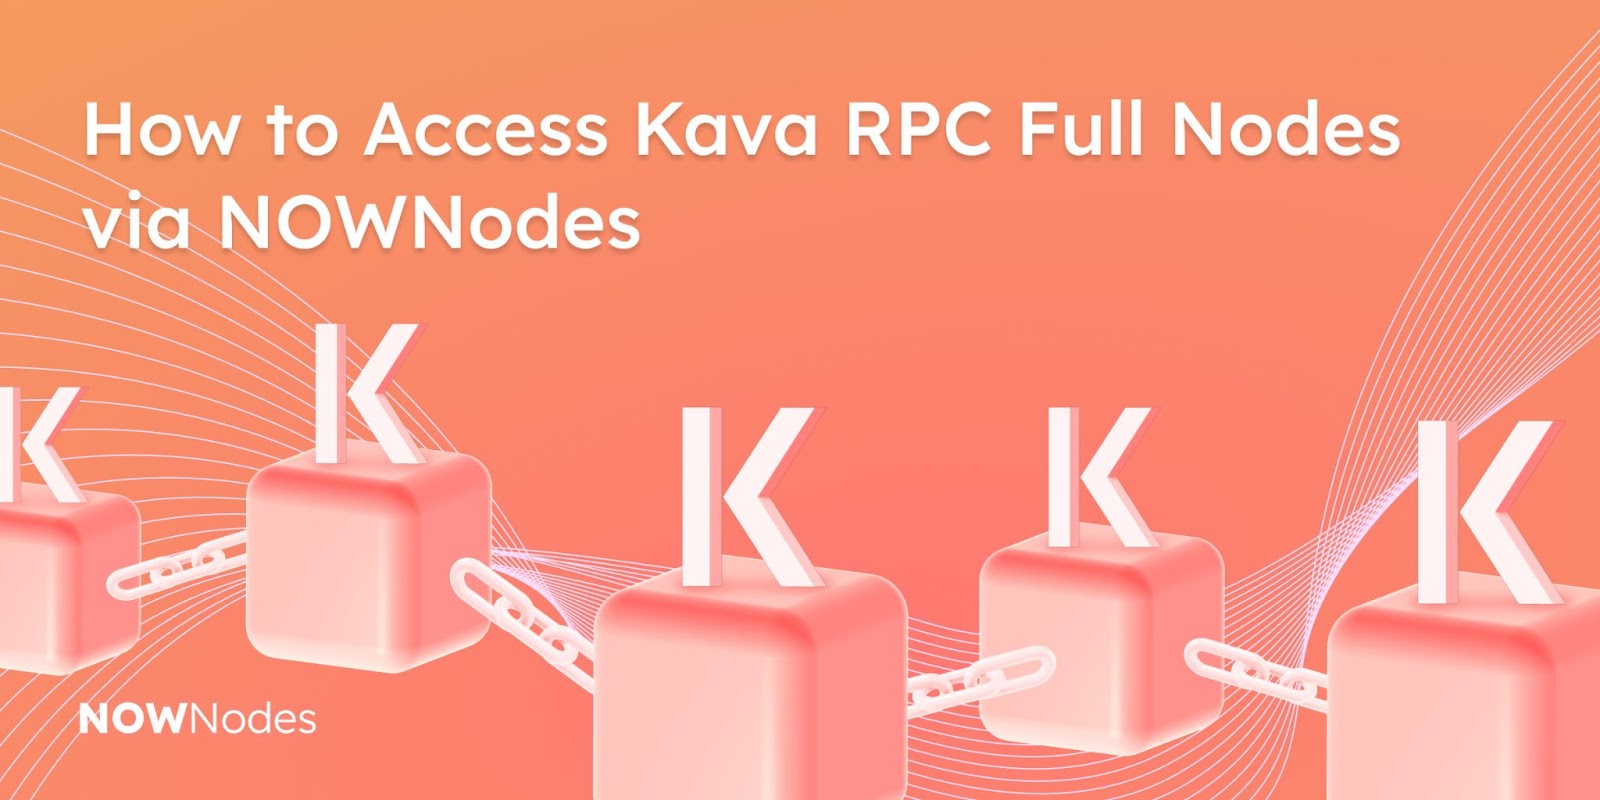 How to Access Kava RPC Full Nodes via NOWNodes